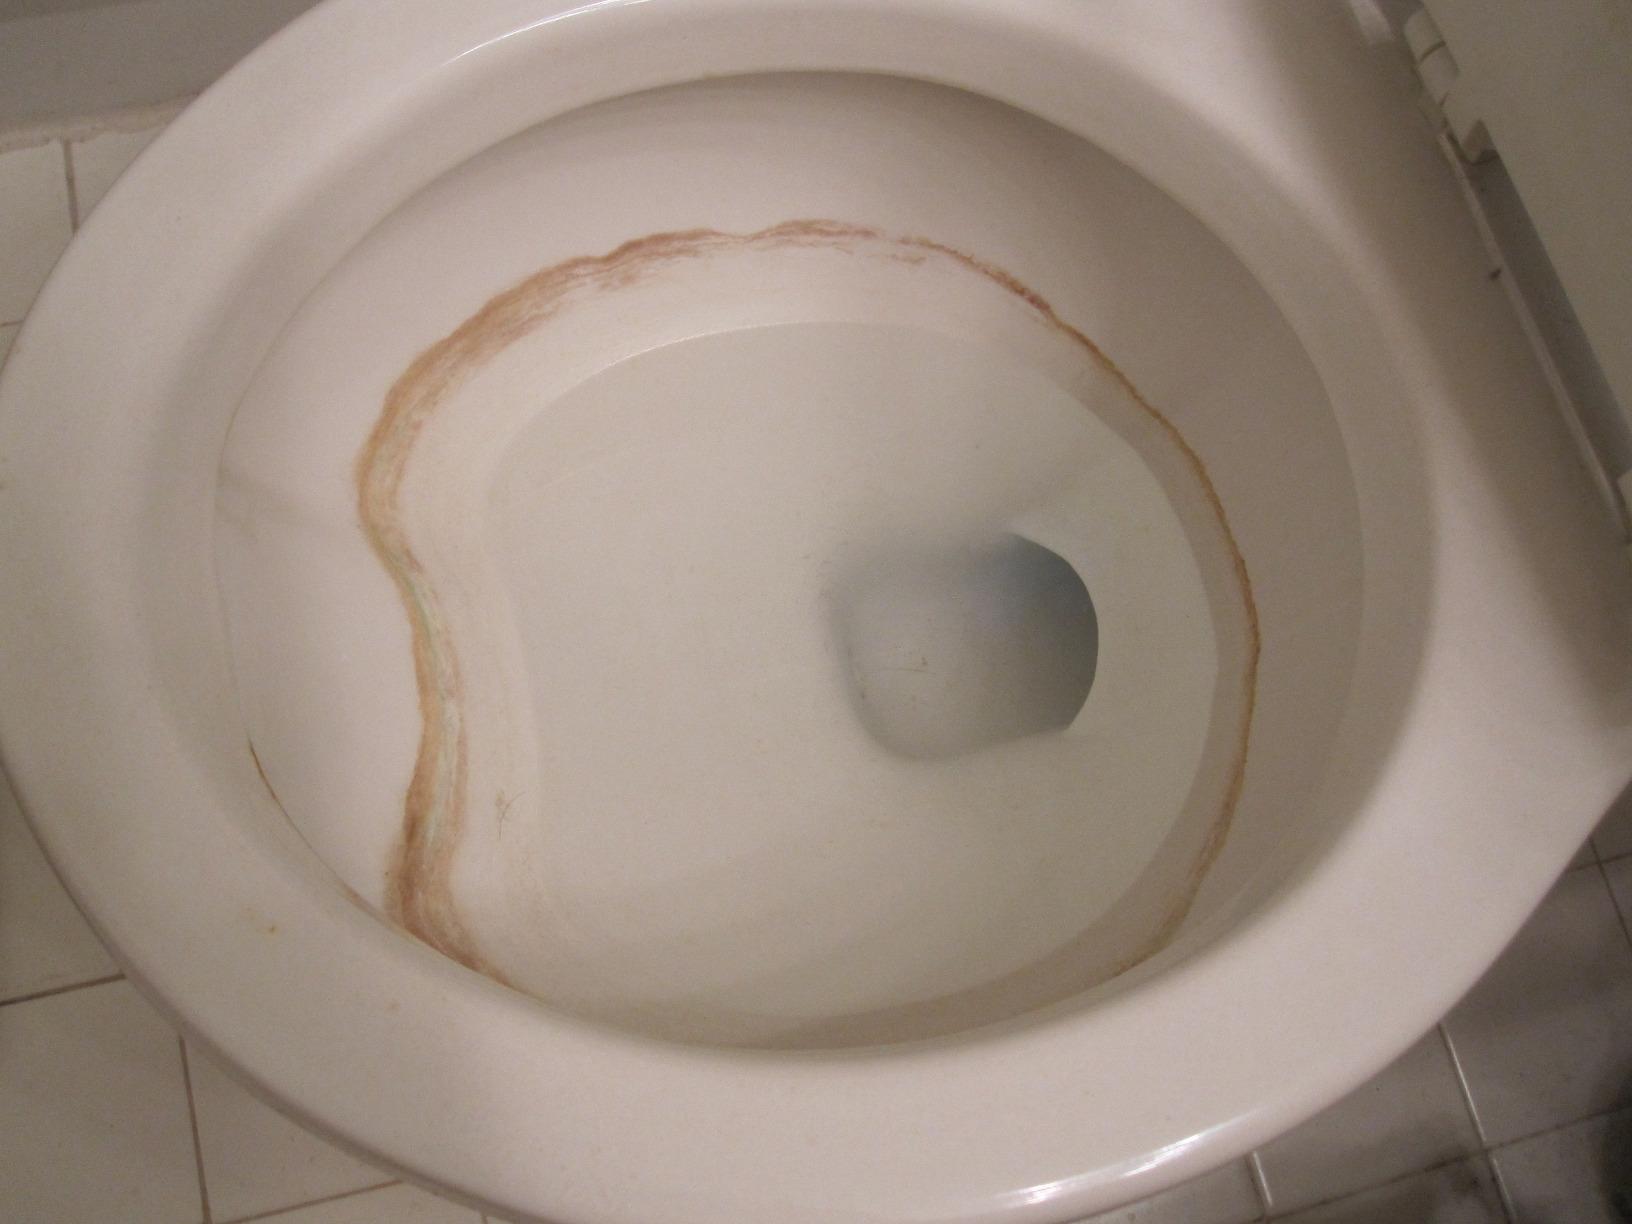 Why You Shouldn't Use Drano in Toilets - Do This Instead - Toilet Haven